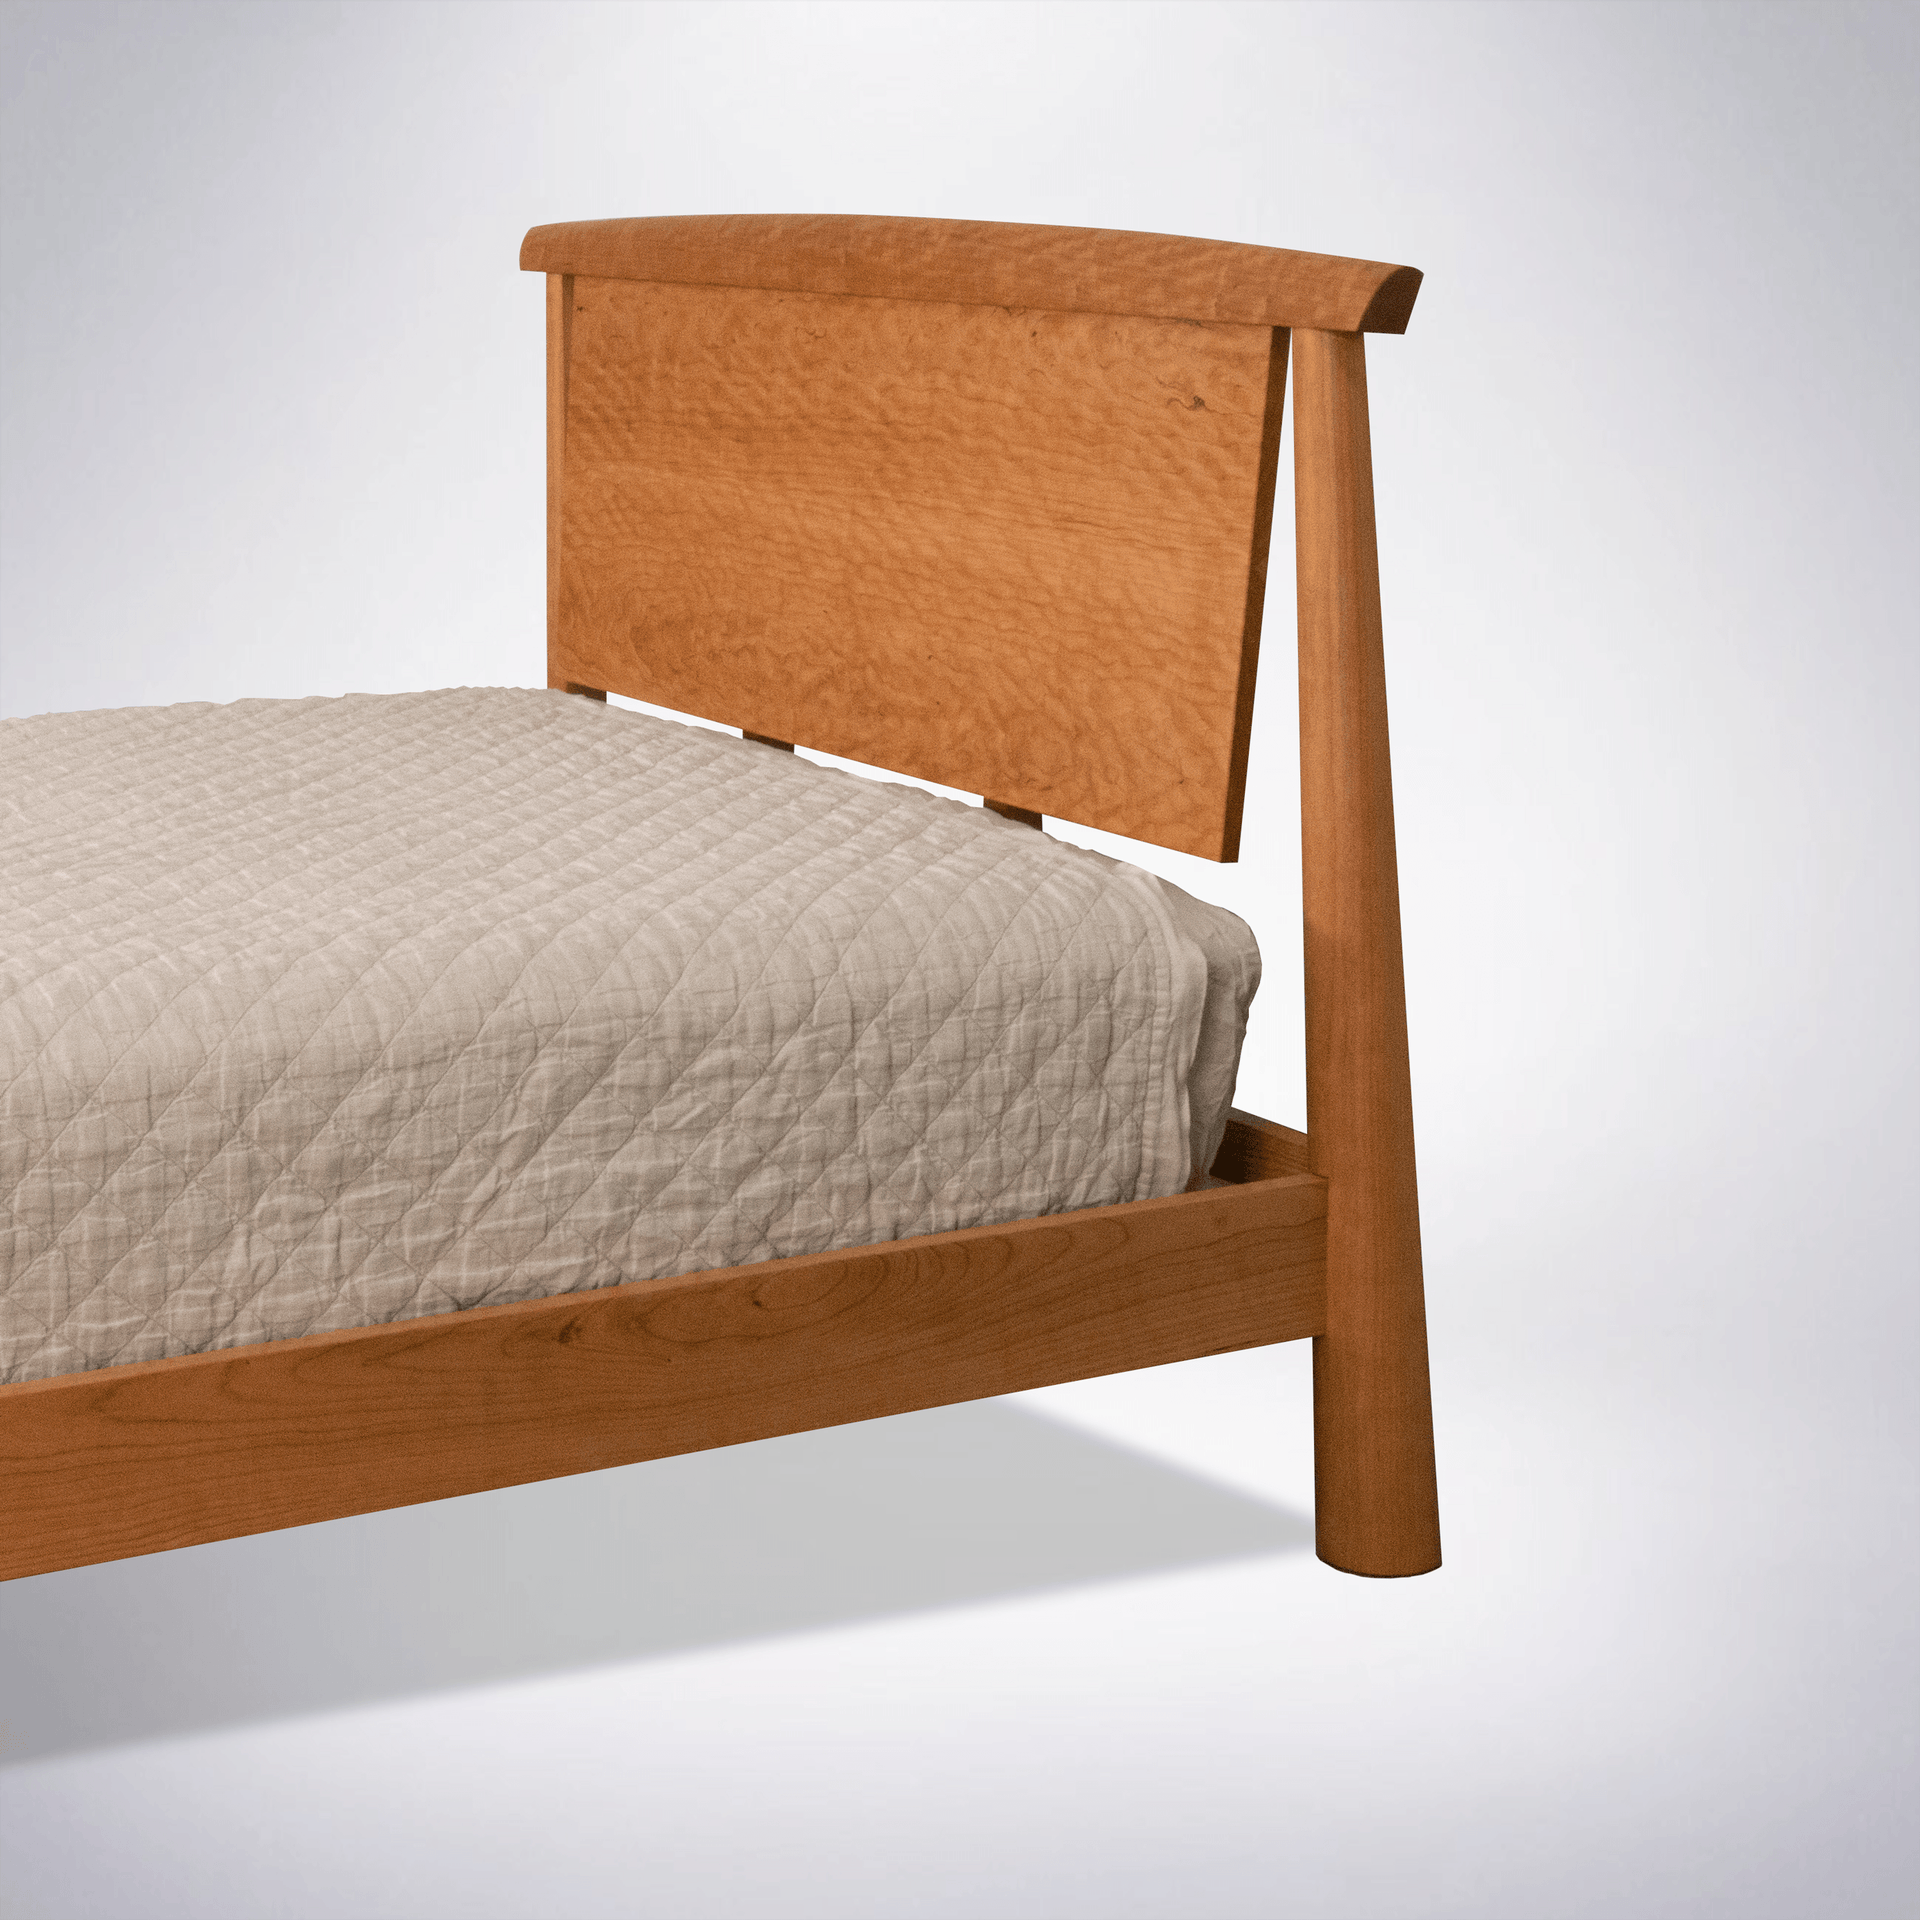 Natural solid wood headboard of an organic modern bed frame